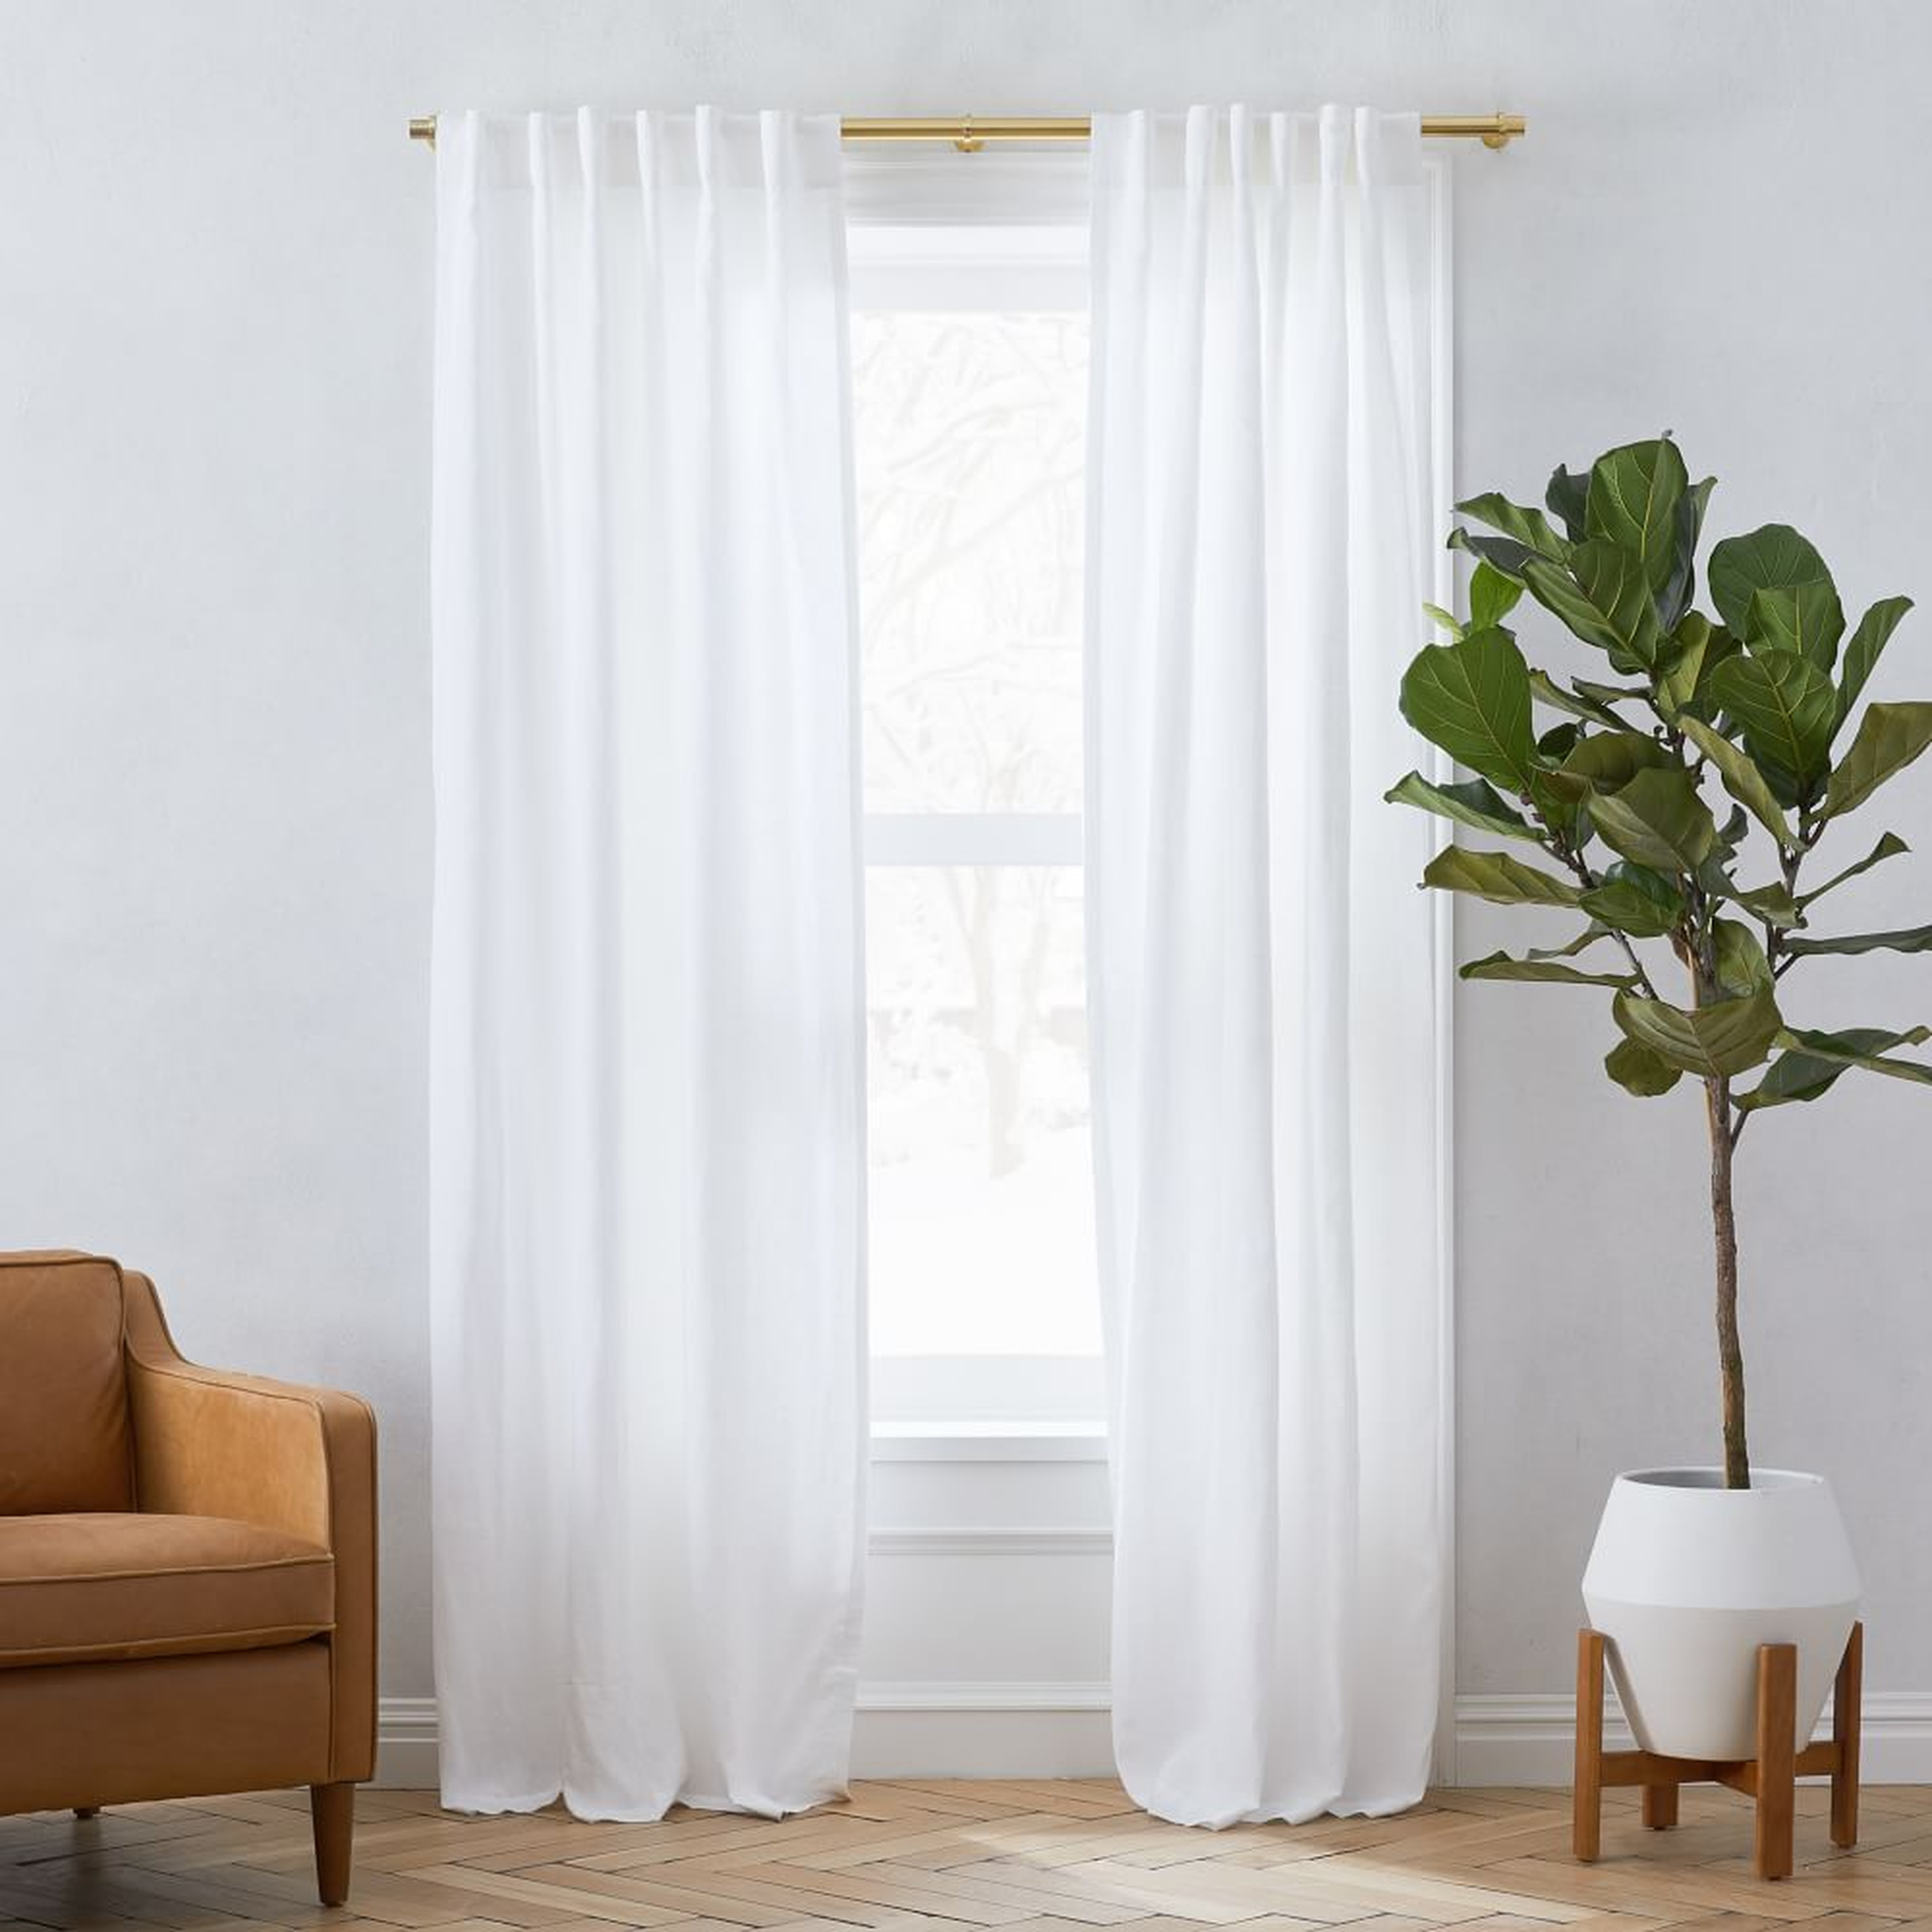 Custom Size Solid European Flax Linen Curtain with Cotton Lining, White, 84"x89" - West Elm